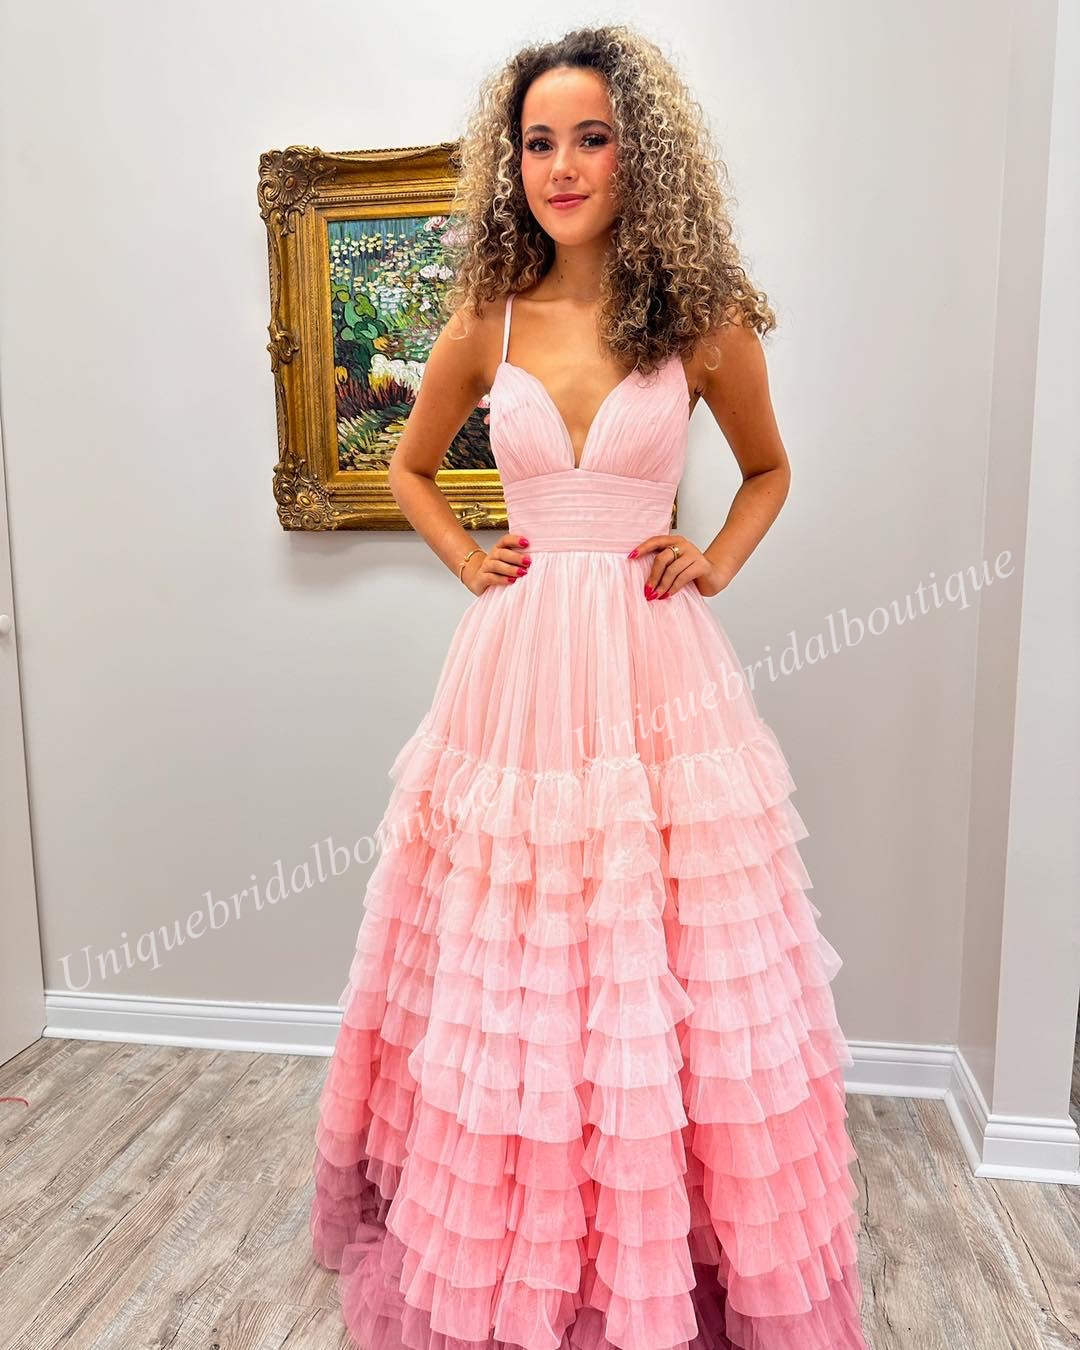 Ruffle Ombre Prom Dress Layer Blush Light Blue Purple Lady Preteen Pageant Gown Formell Evening Cocktail Party Wedding Guest Red Capet Runway Gala Black-Tie High Slite